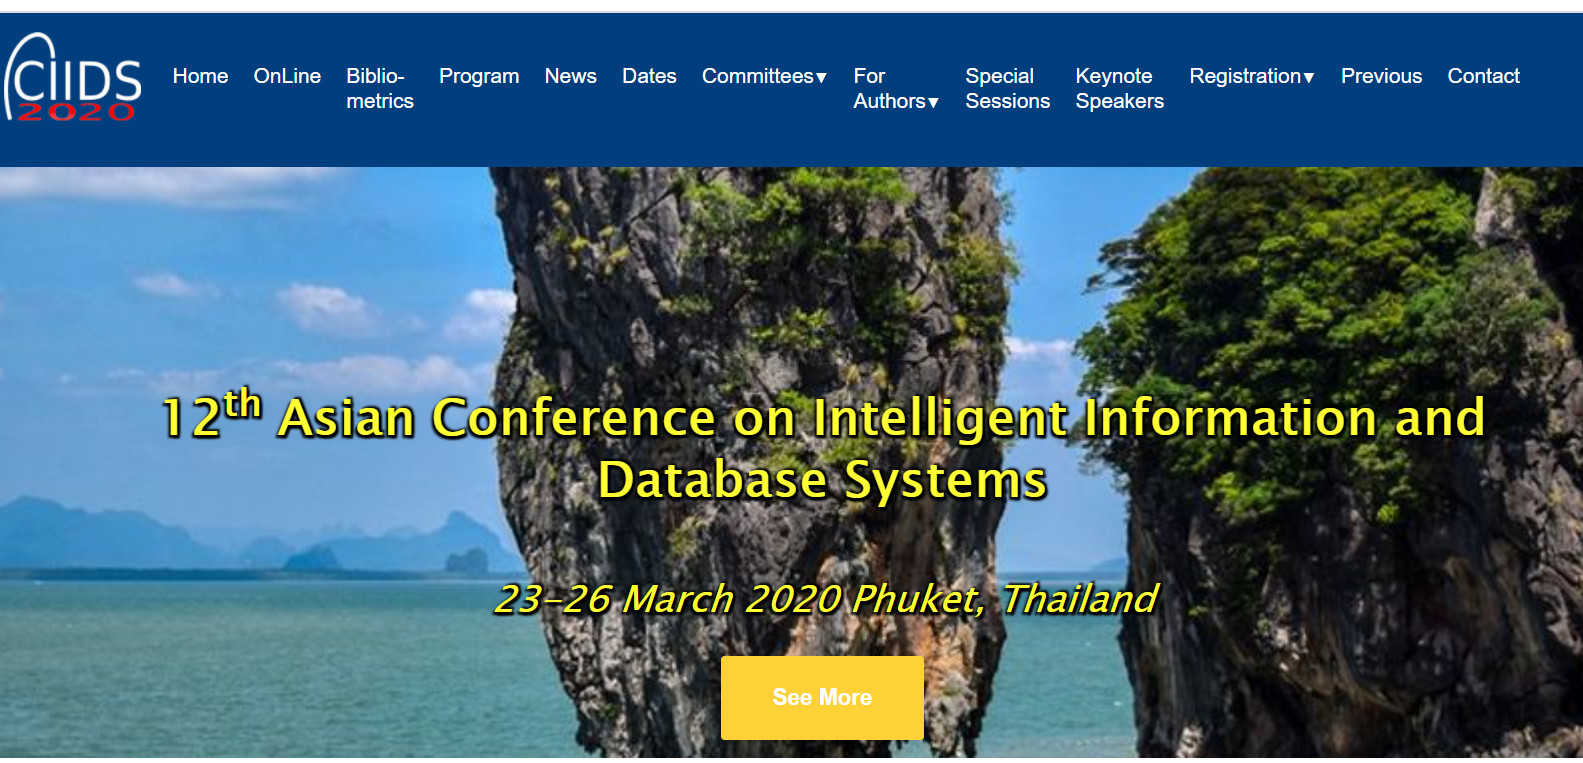 12th Asian Conference on Intelligent Information and Database Systems 23-26 March 2020 Phuket, Thailand